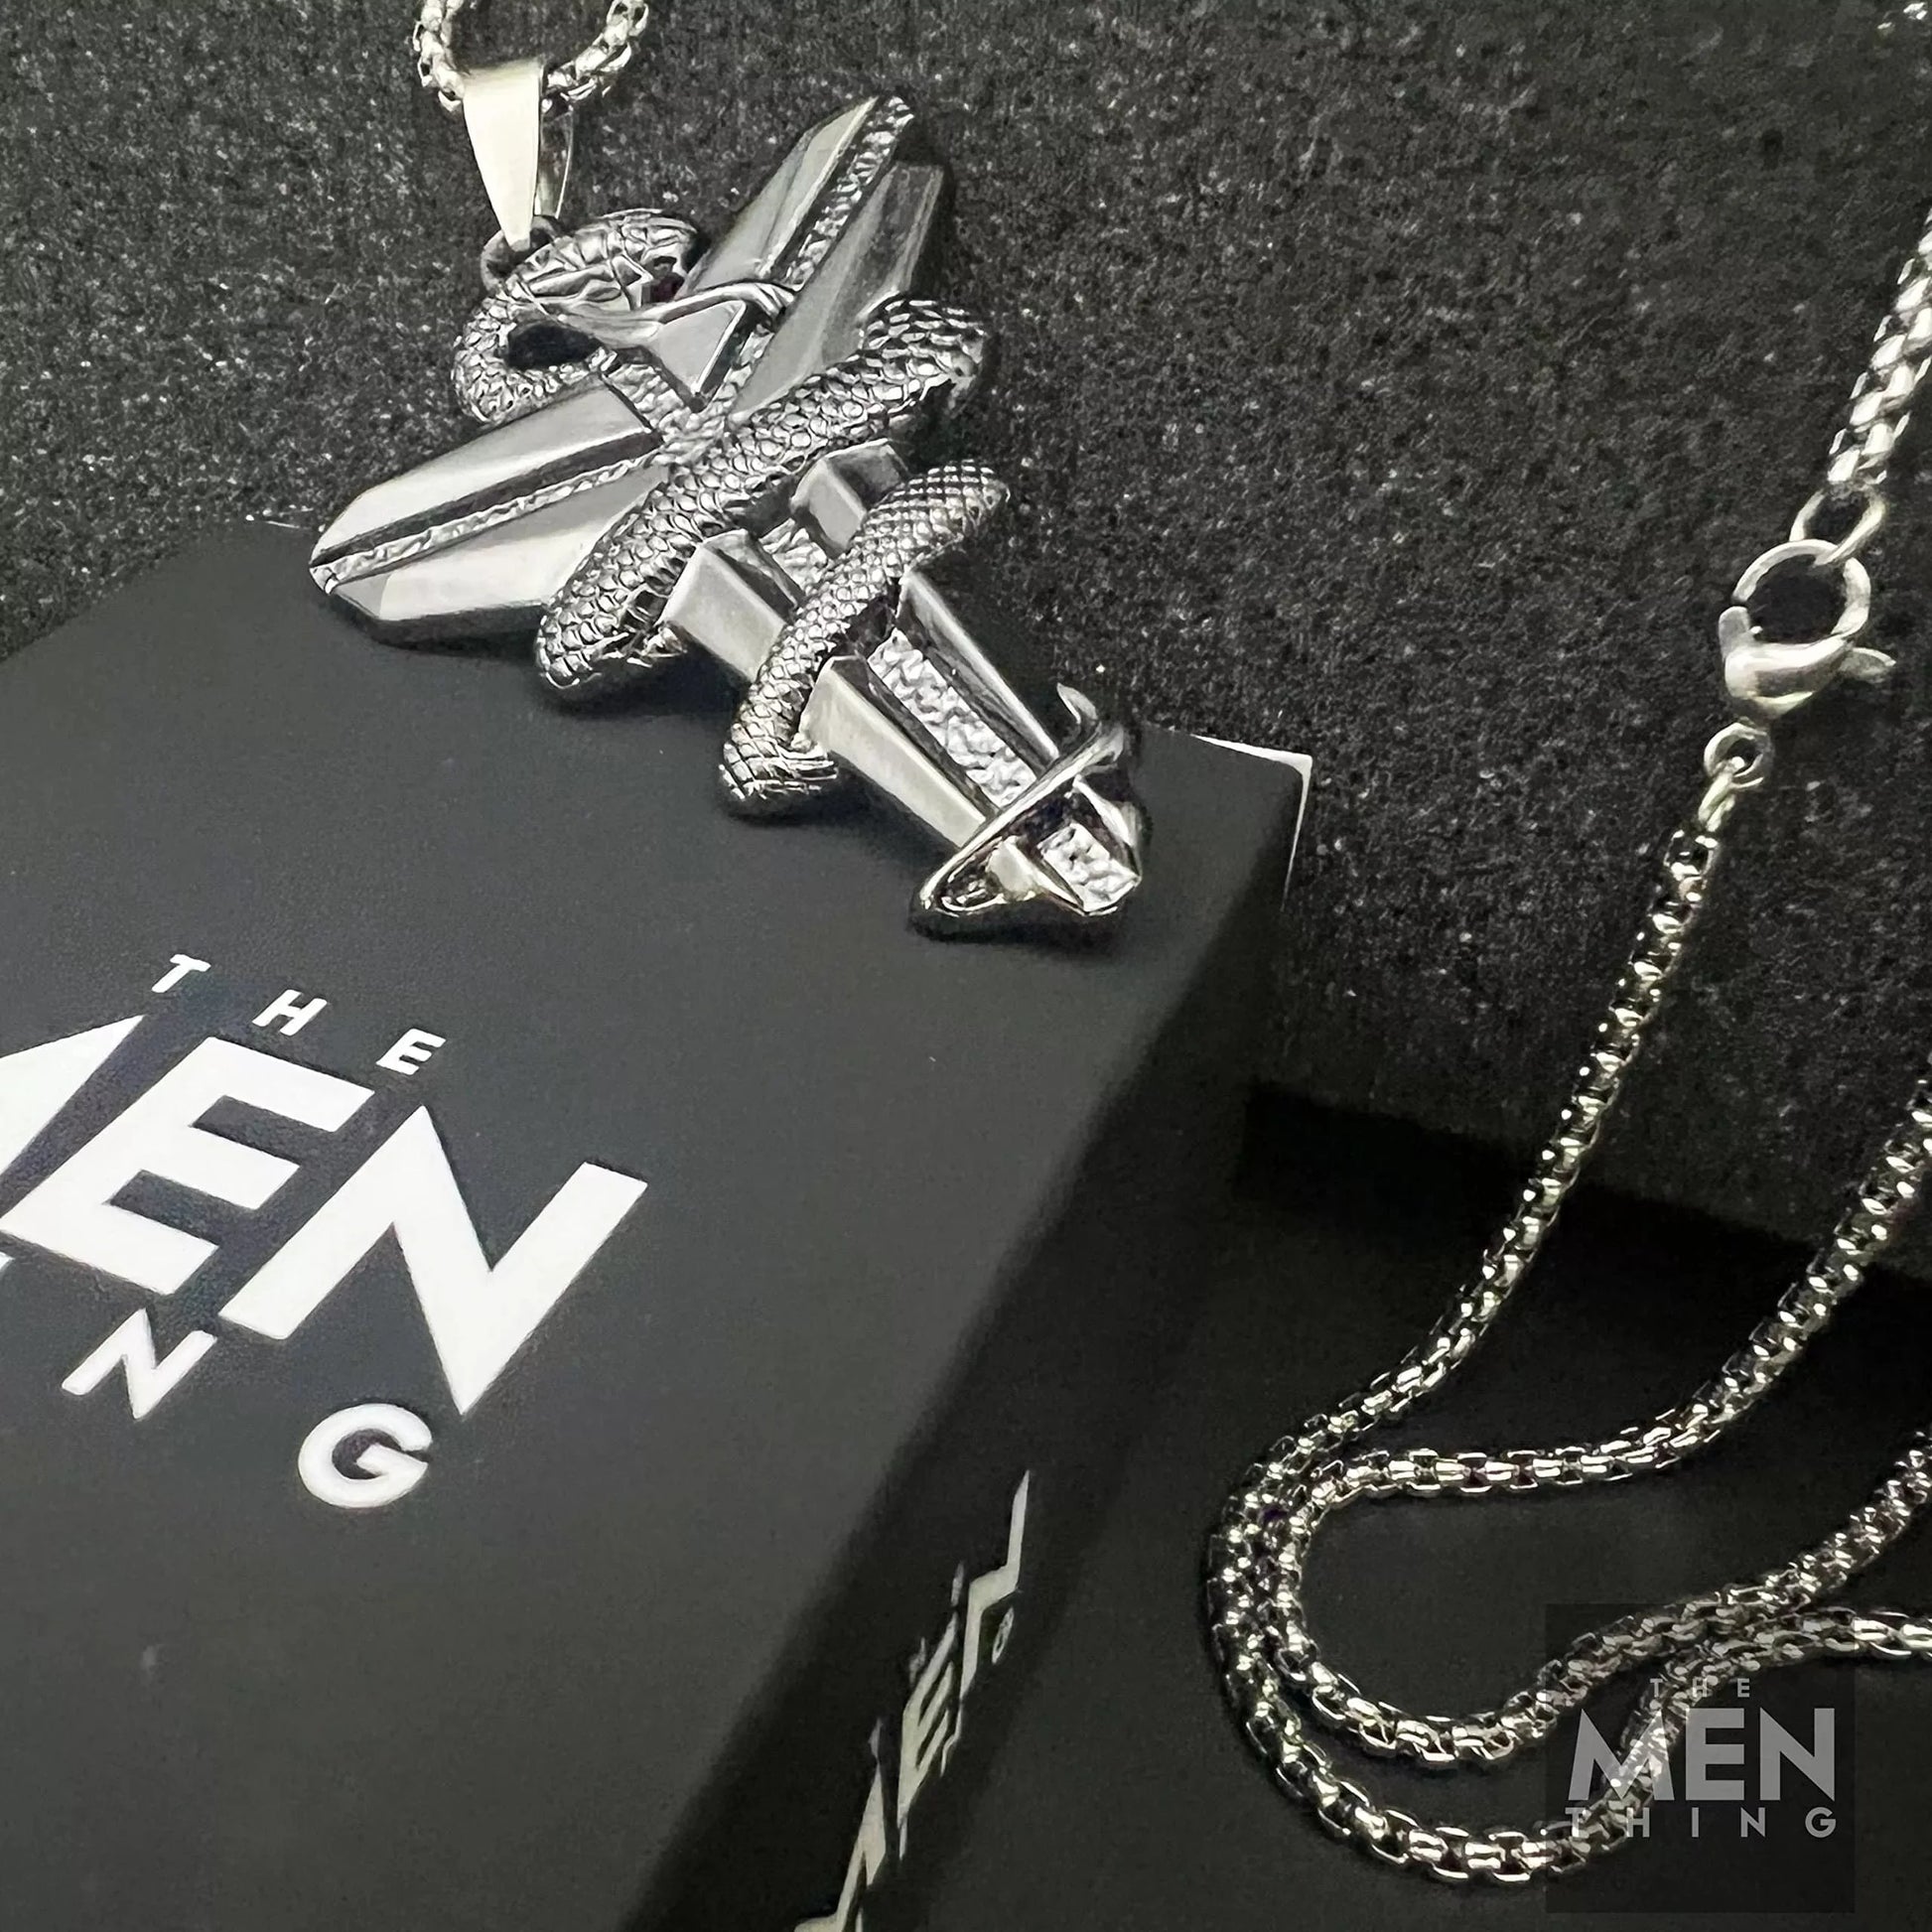 THE MEN THING Pendant for Men - Pure Titanium Steel Black Mamba Pendant with 24inch Round Box Chain for Men & Boys